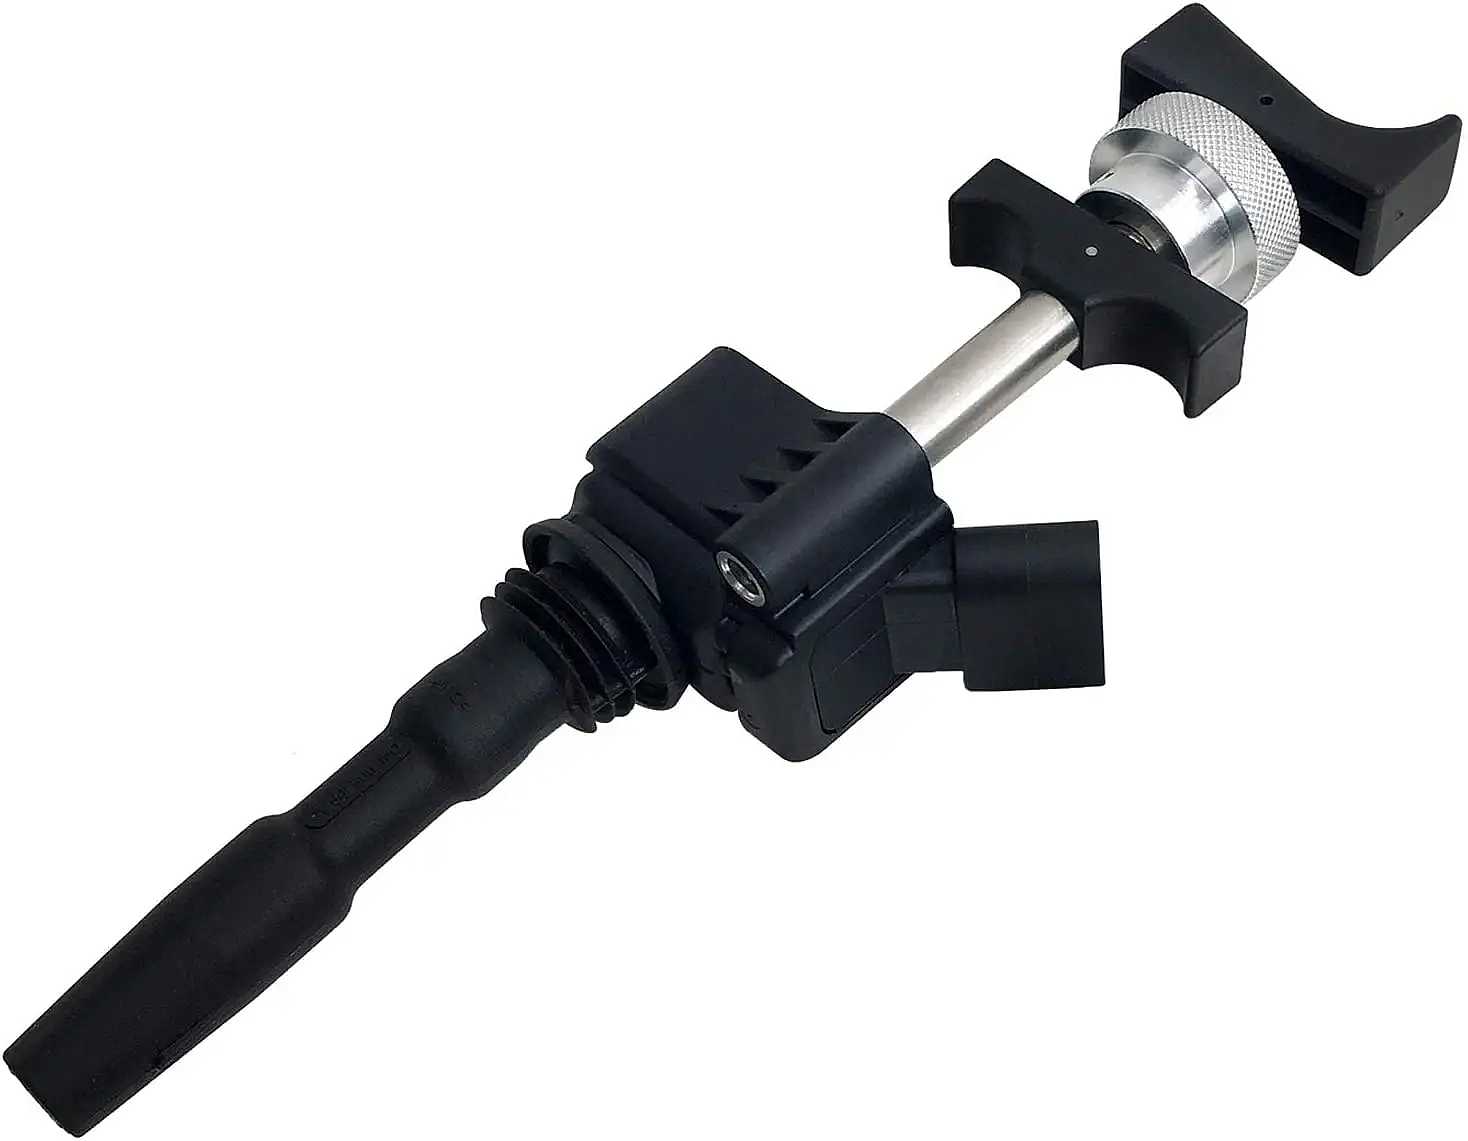 Ignition coil disassembly tool like VAG VW T10530